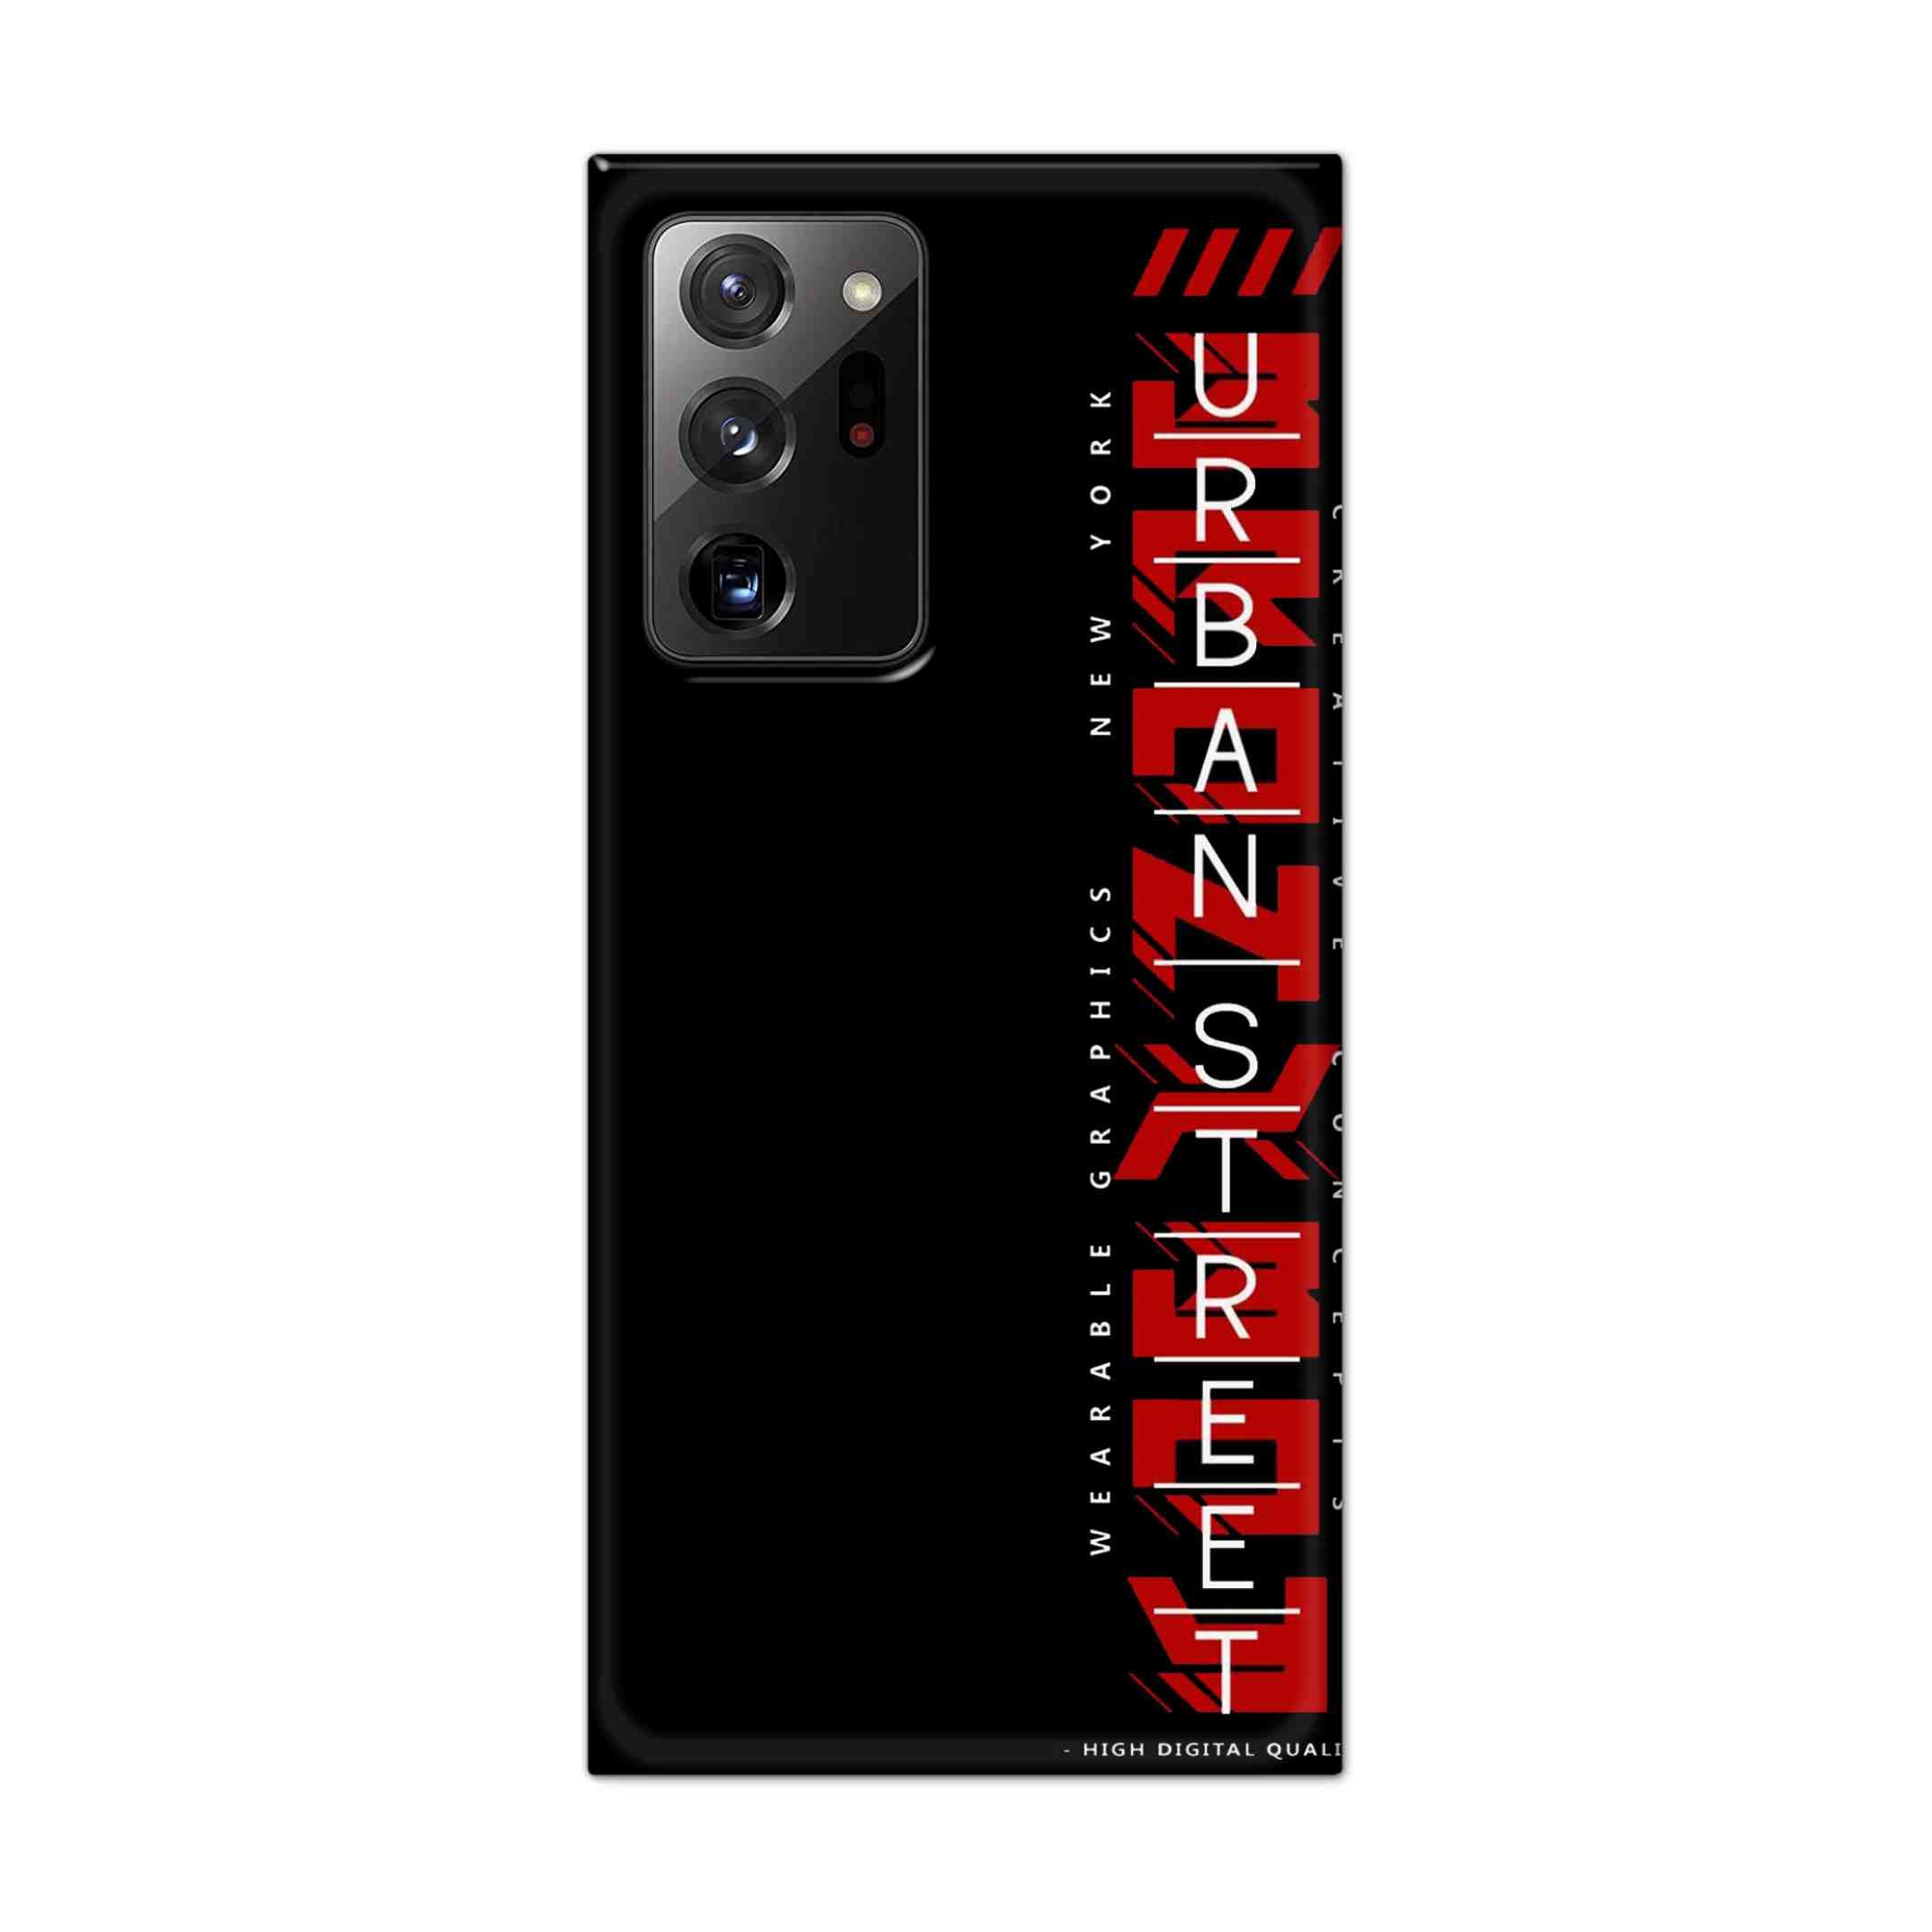 Buy Urban Street Hard Back Mobile Phone Case Cover For Samsung Galaxy Note 20 Ultra Online